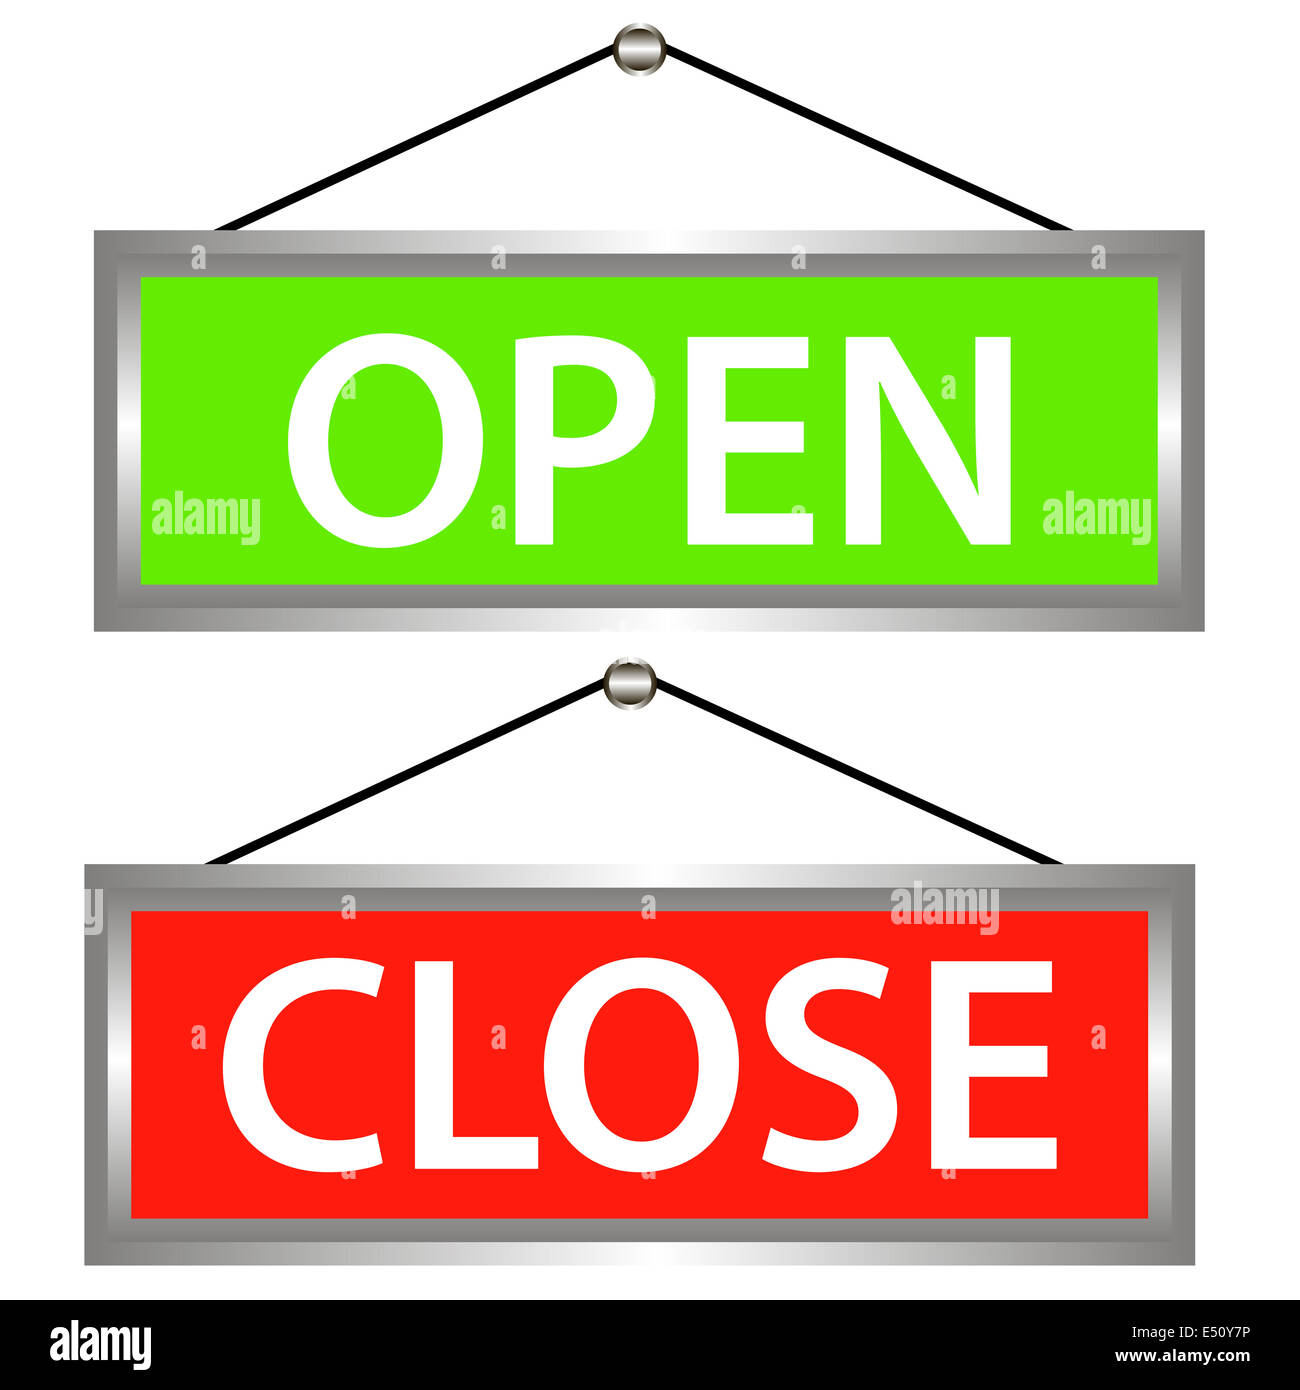 Open and close icons Stock Photo